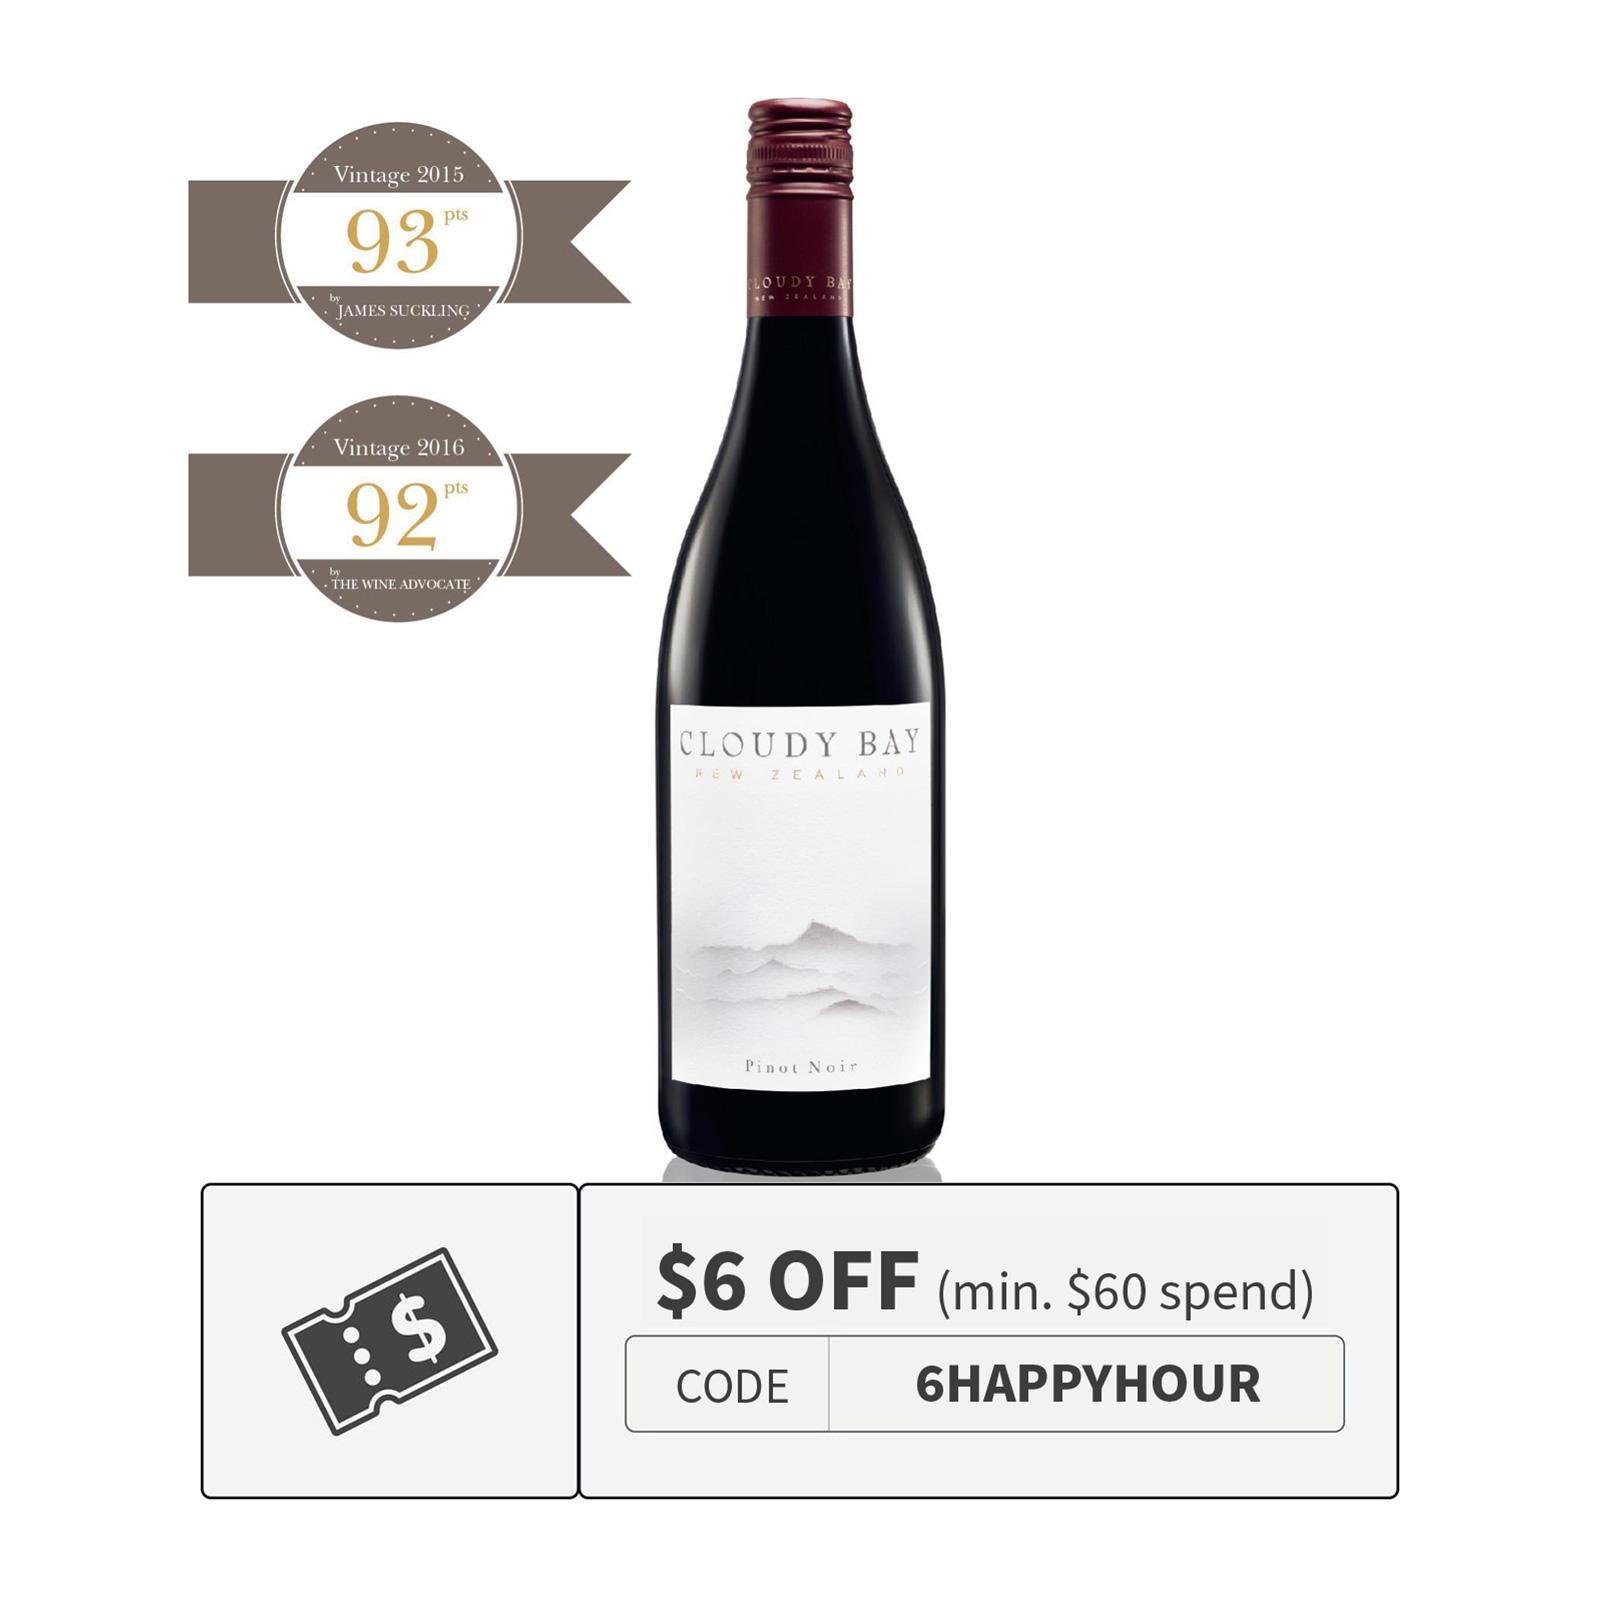 Buy Cloudy Bay Red Wine Online